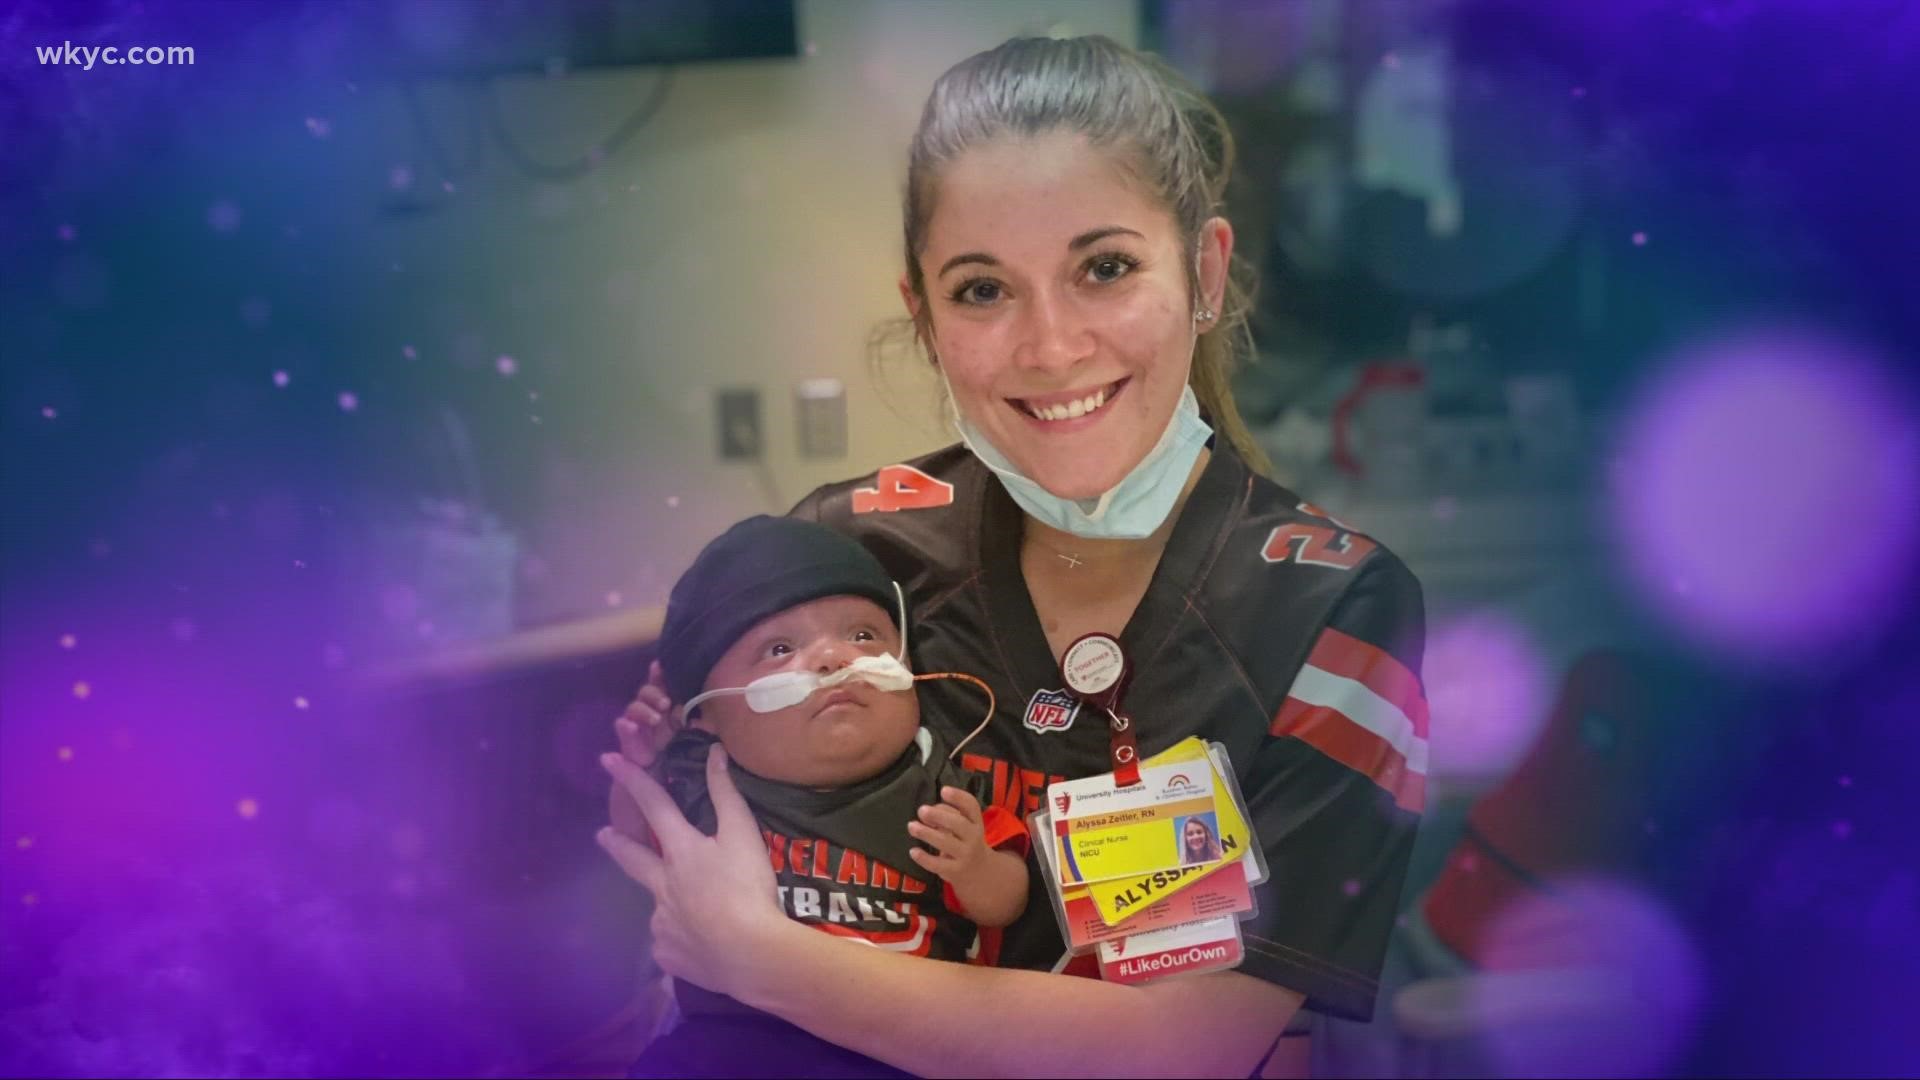 For months, Alyssa Zeitler dedicated her days to caring for a premature baby, who lived, in part, because of her.